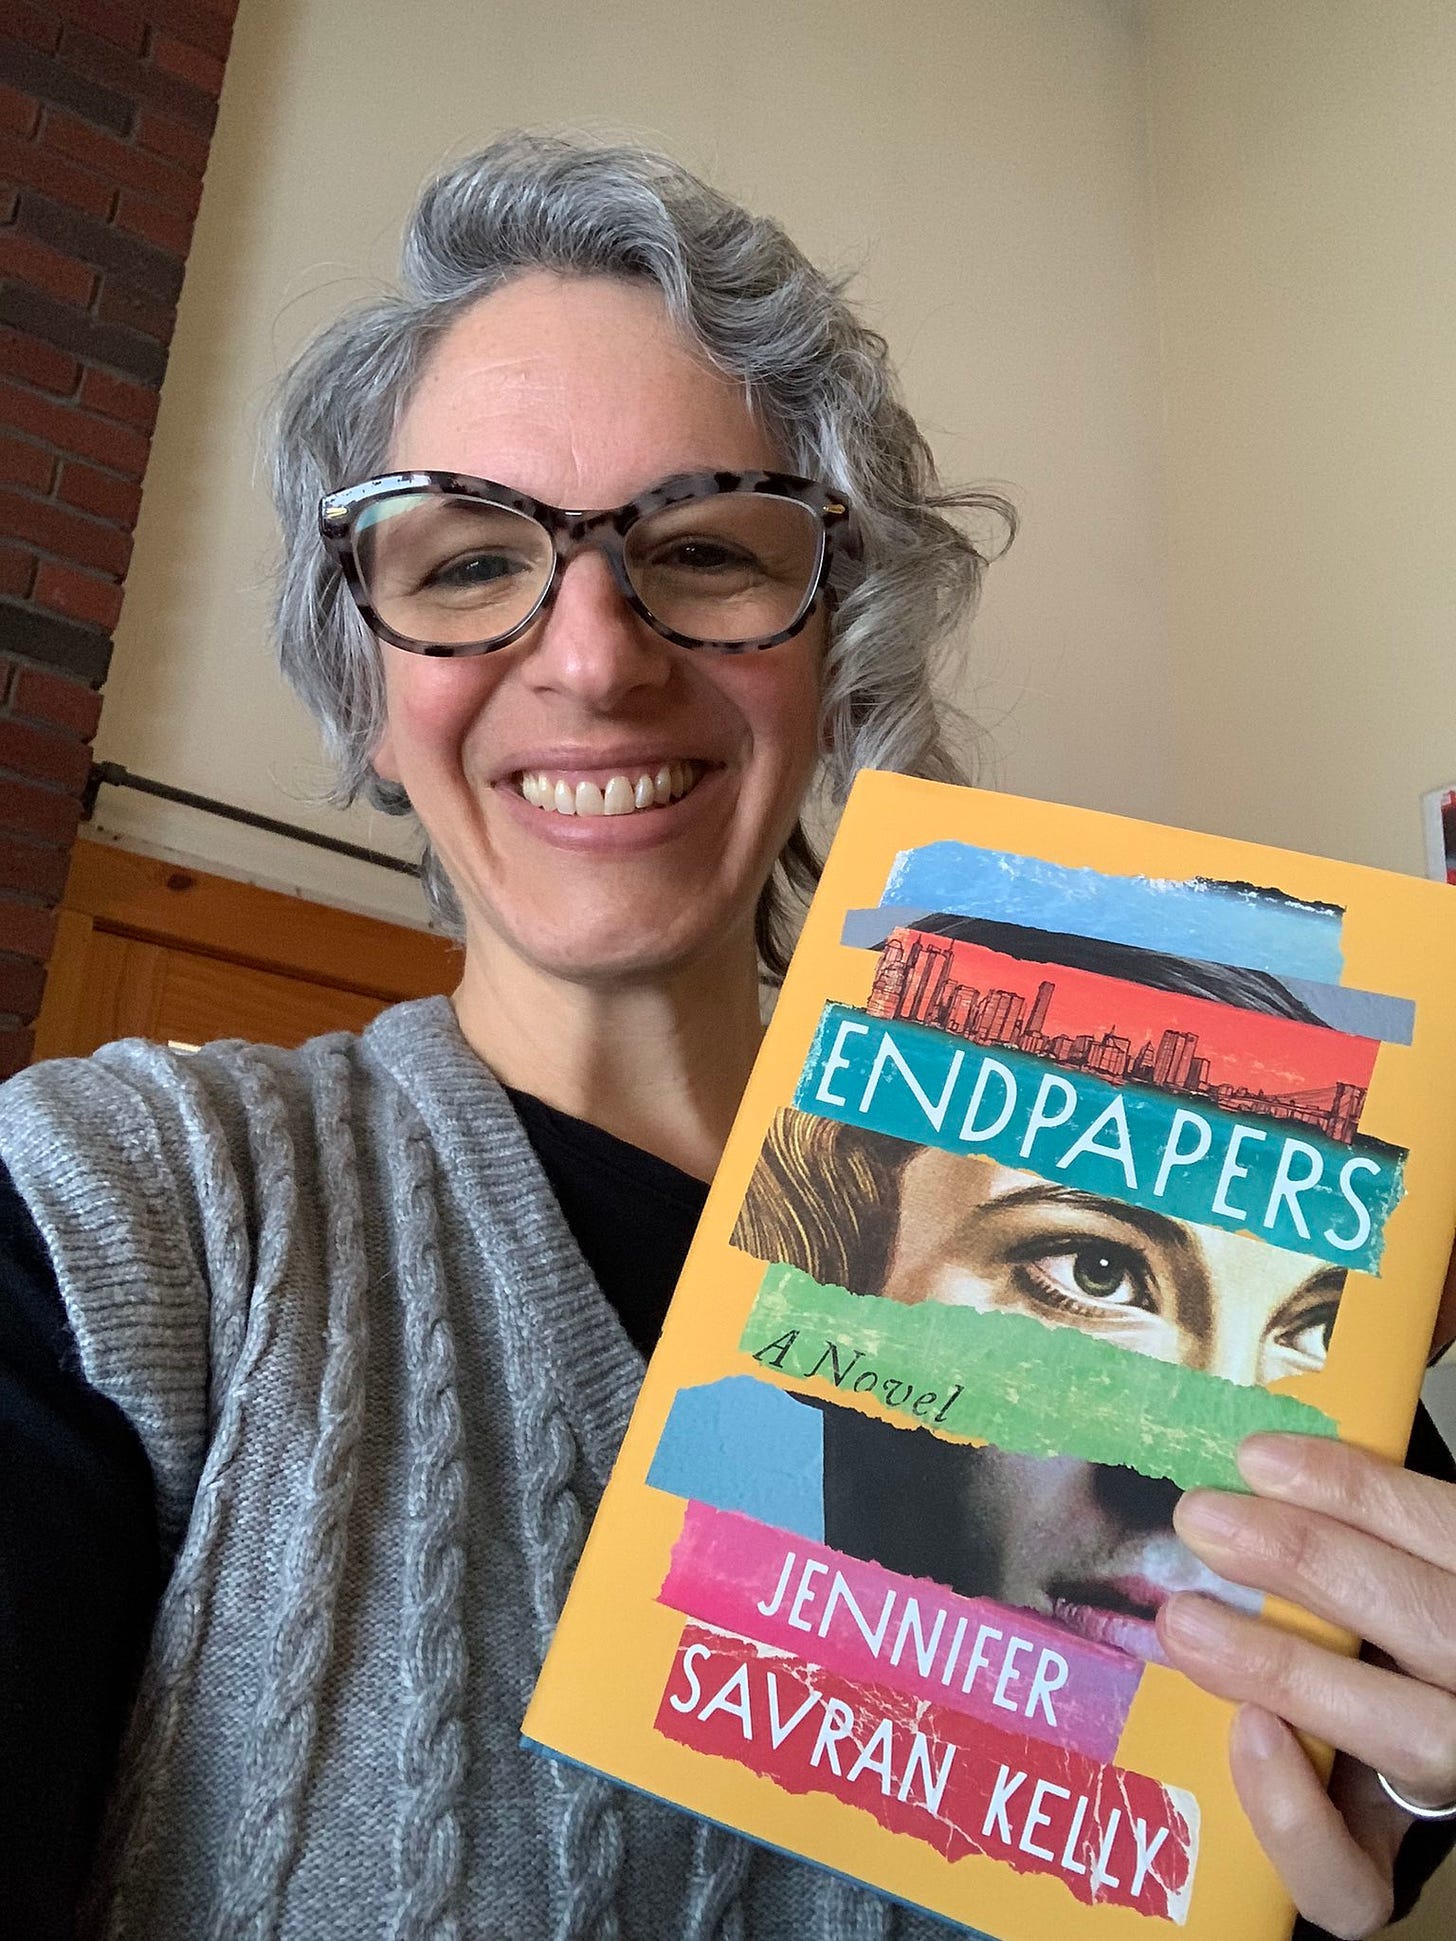 Selfie of me holding a copy of ENDPAPERS: A NOVEL by Jennifer Savran Kelly. I have short, curly gray hair and glasses.